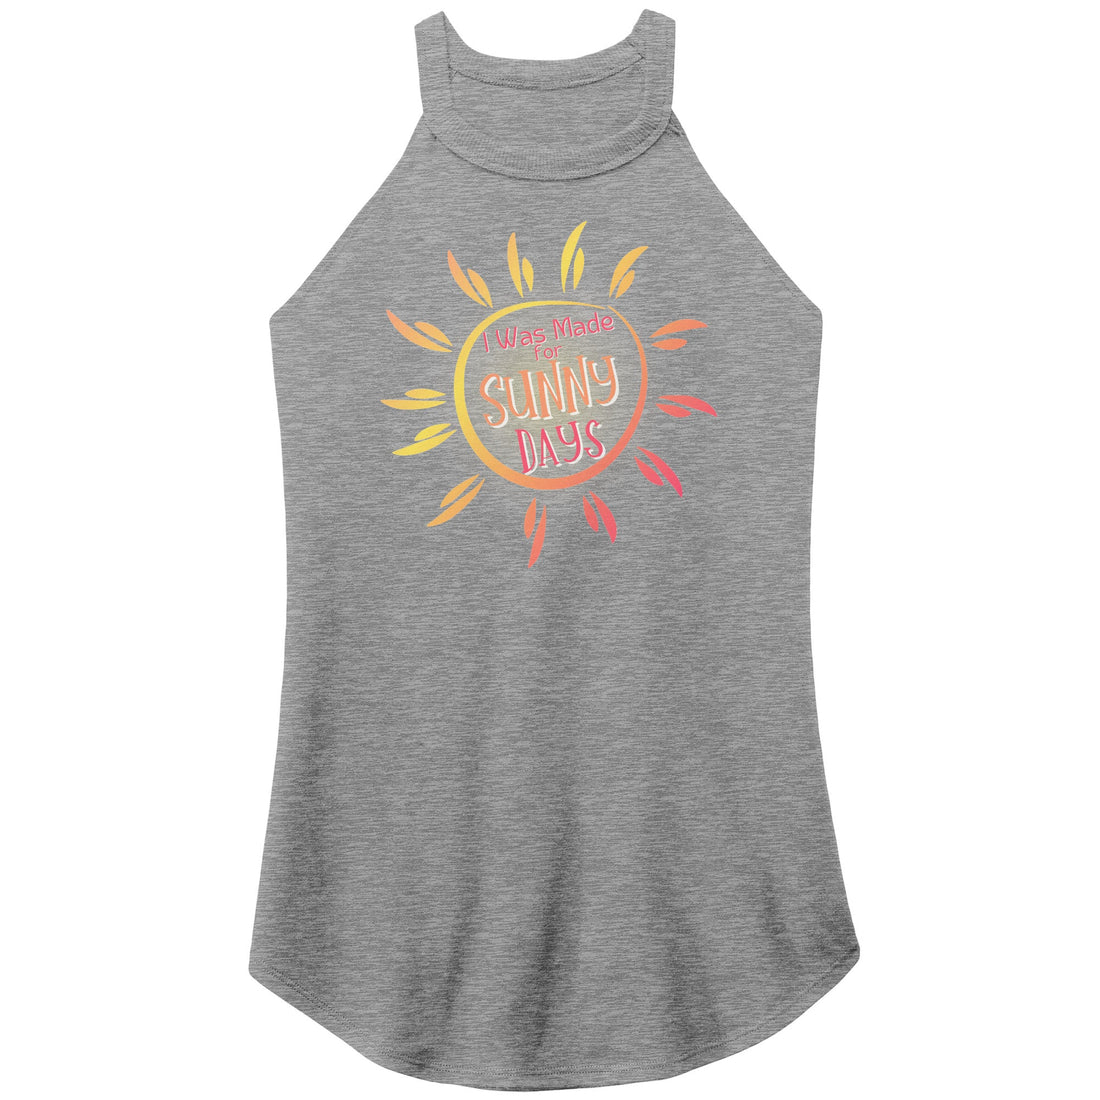 Made for Sunny Days Racer Tank - Apparel - Positively Sassy - Made for Sunny Days Racer Tank